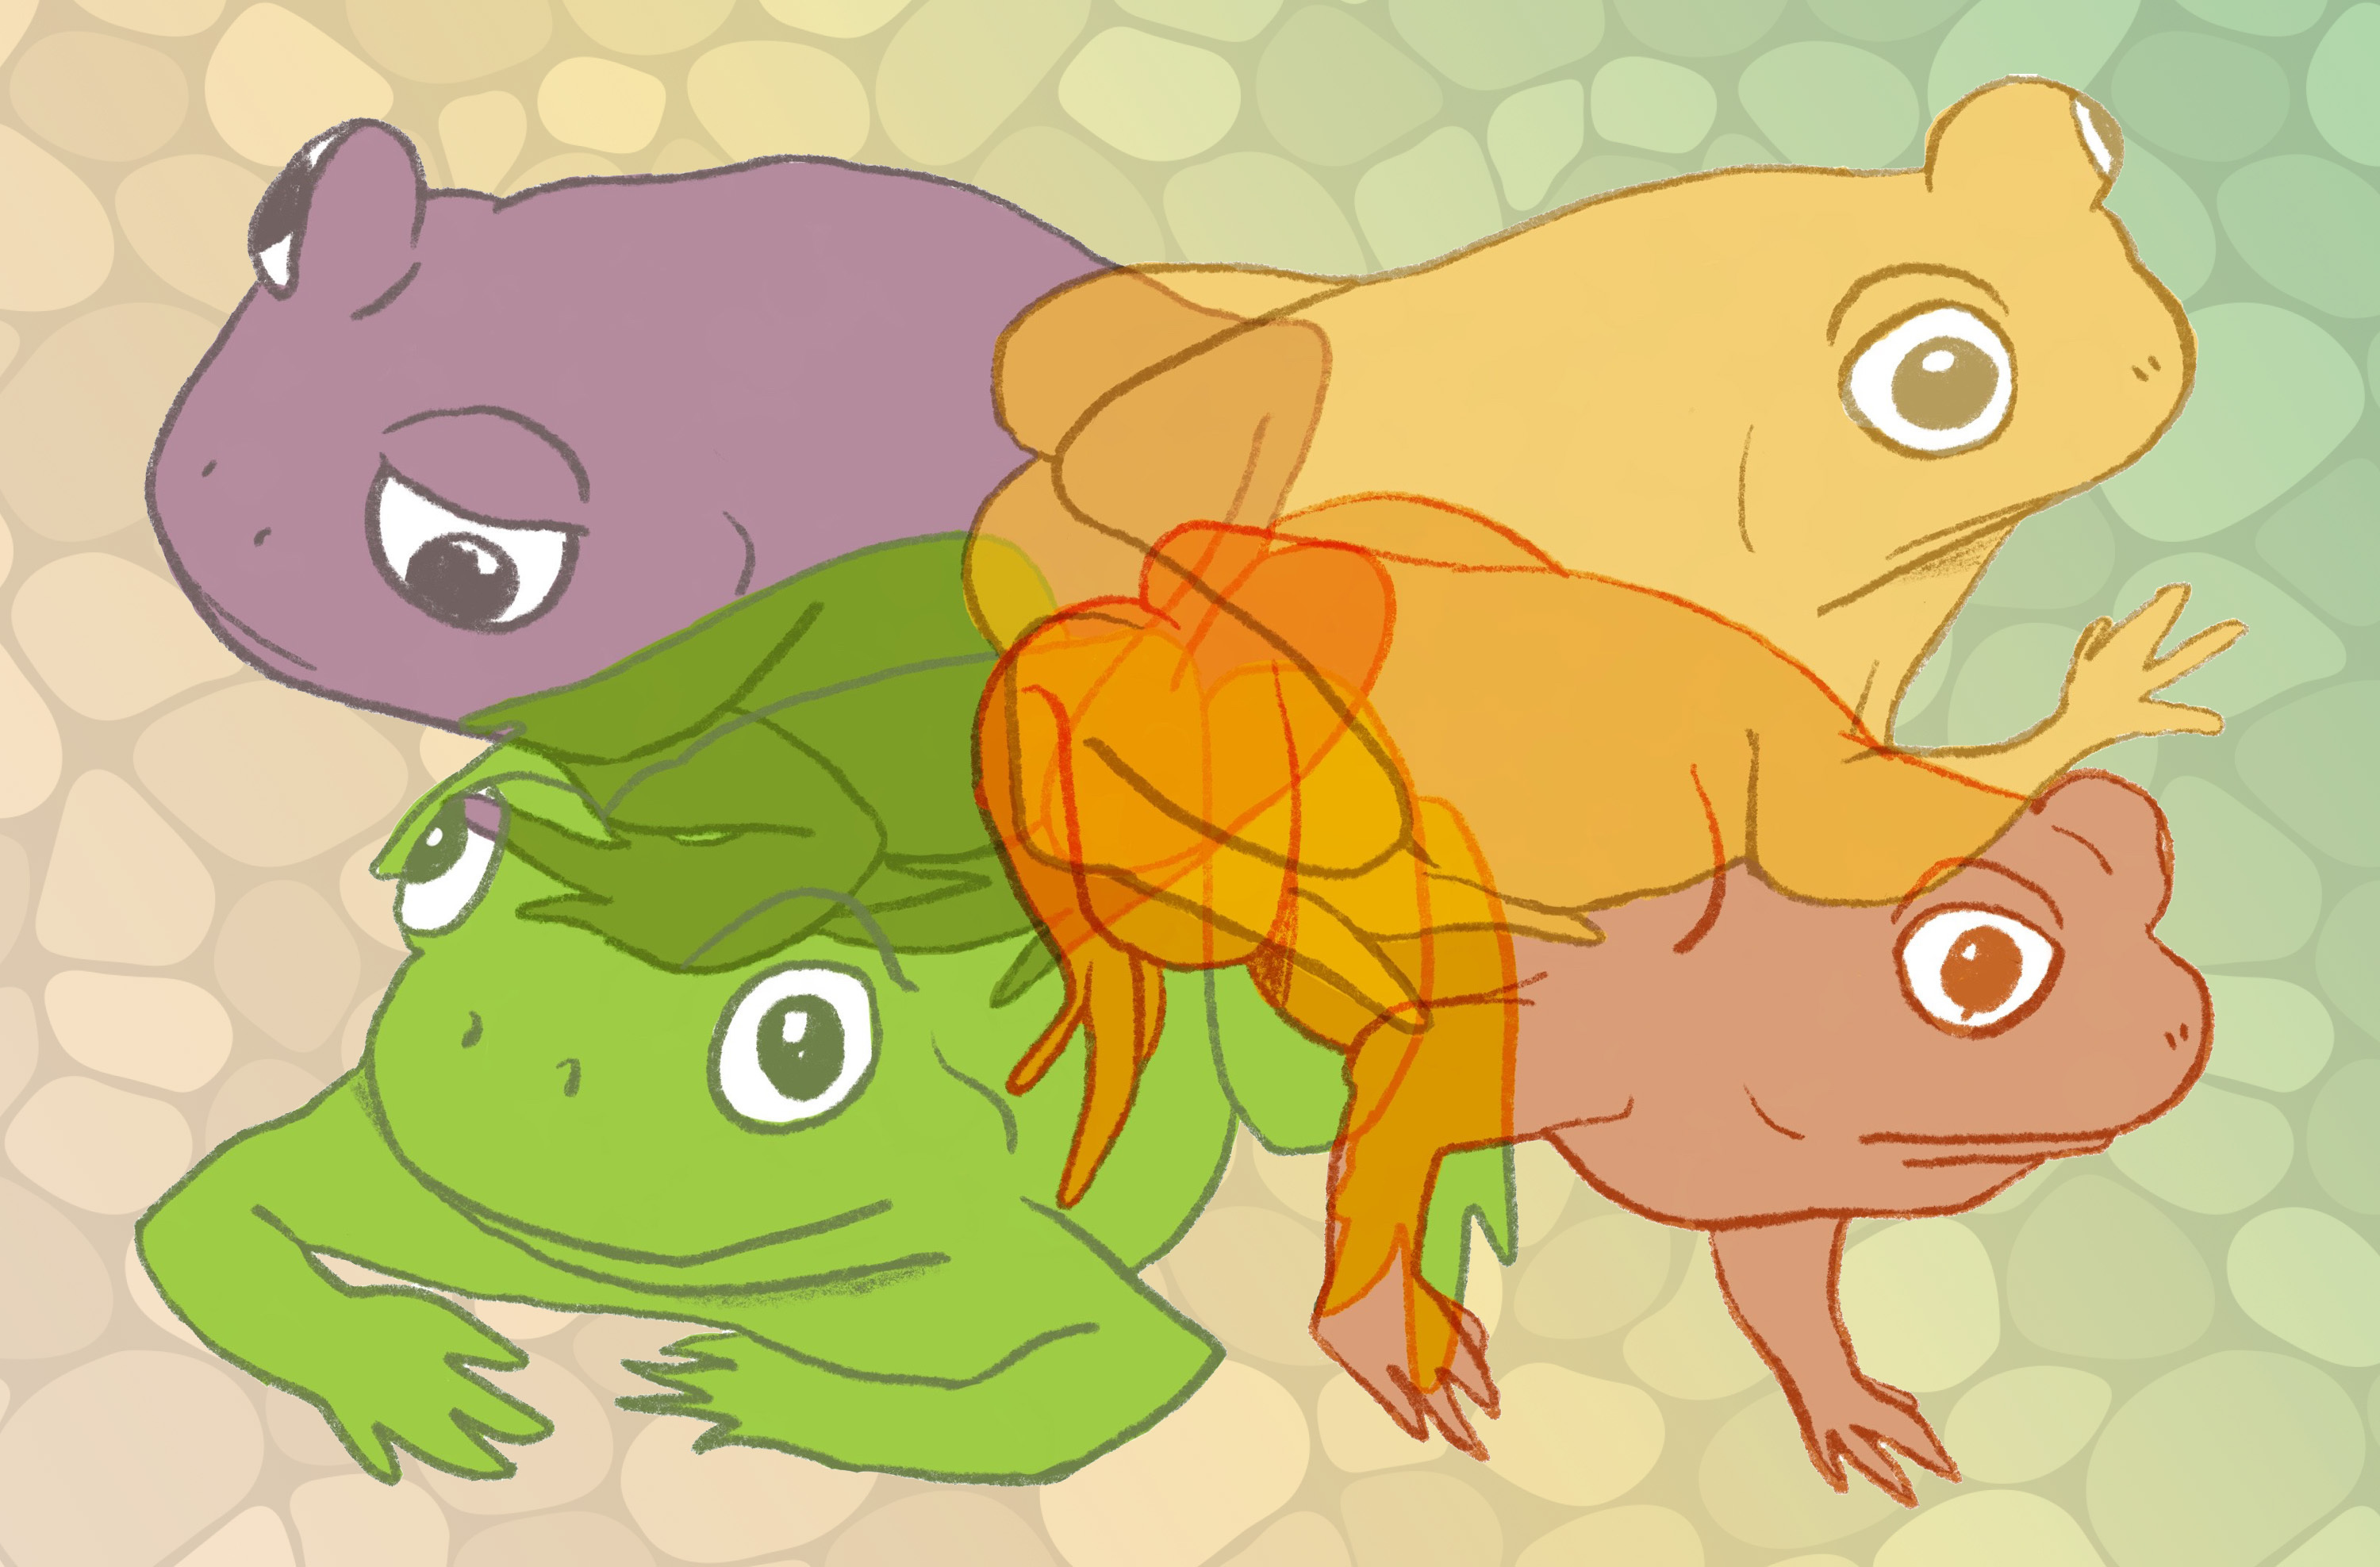 an illustration of four frogs of different colors facing out to the for corners of the image. their hind legs and rear ends overlap in the center. the background is abstract pebbles